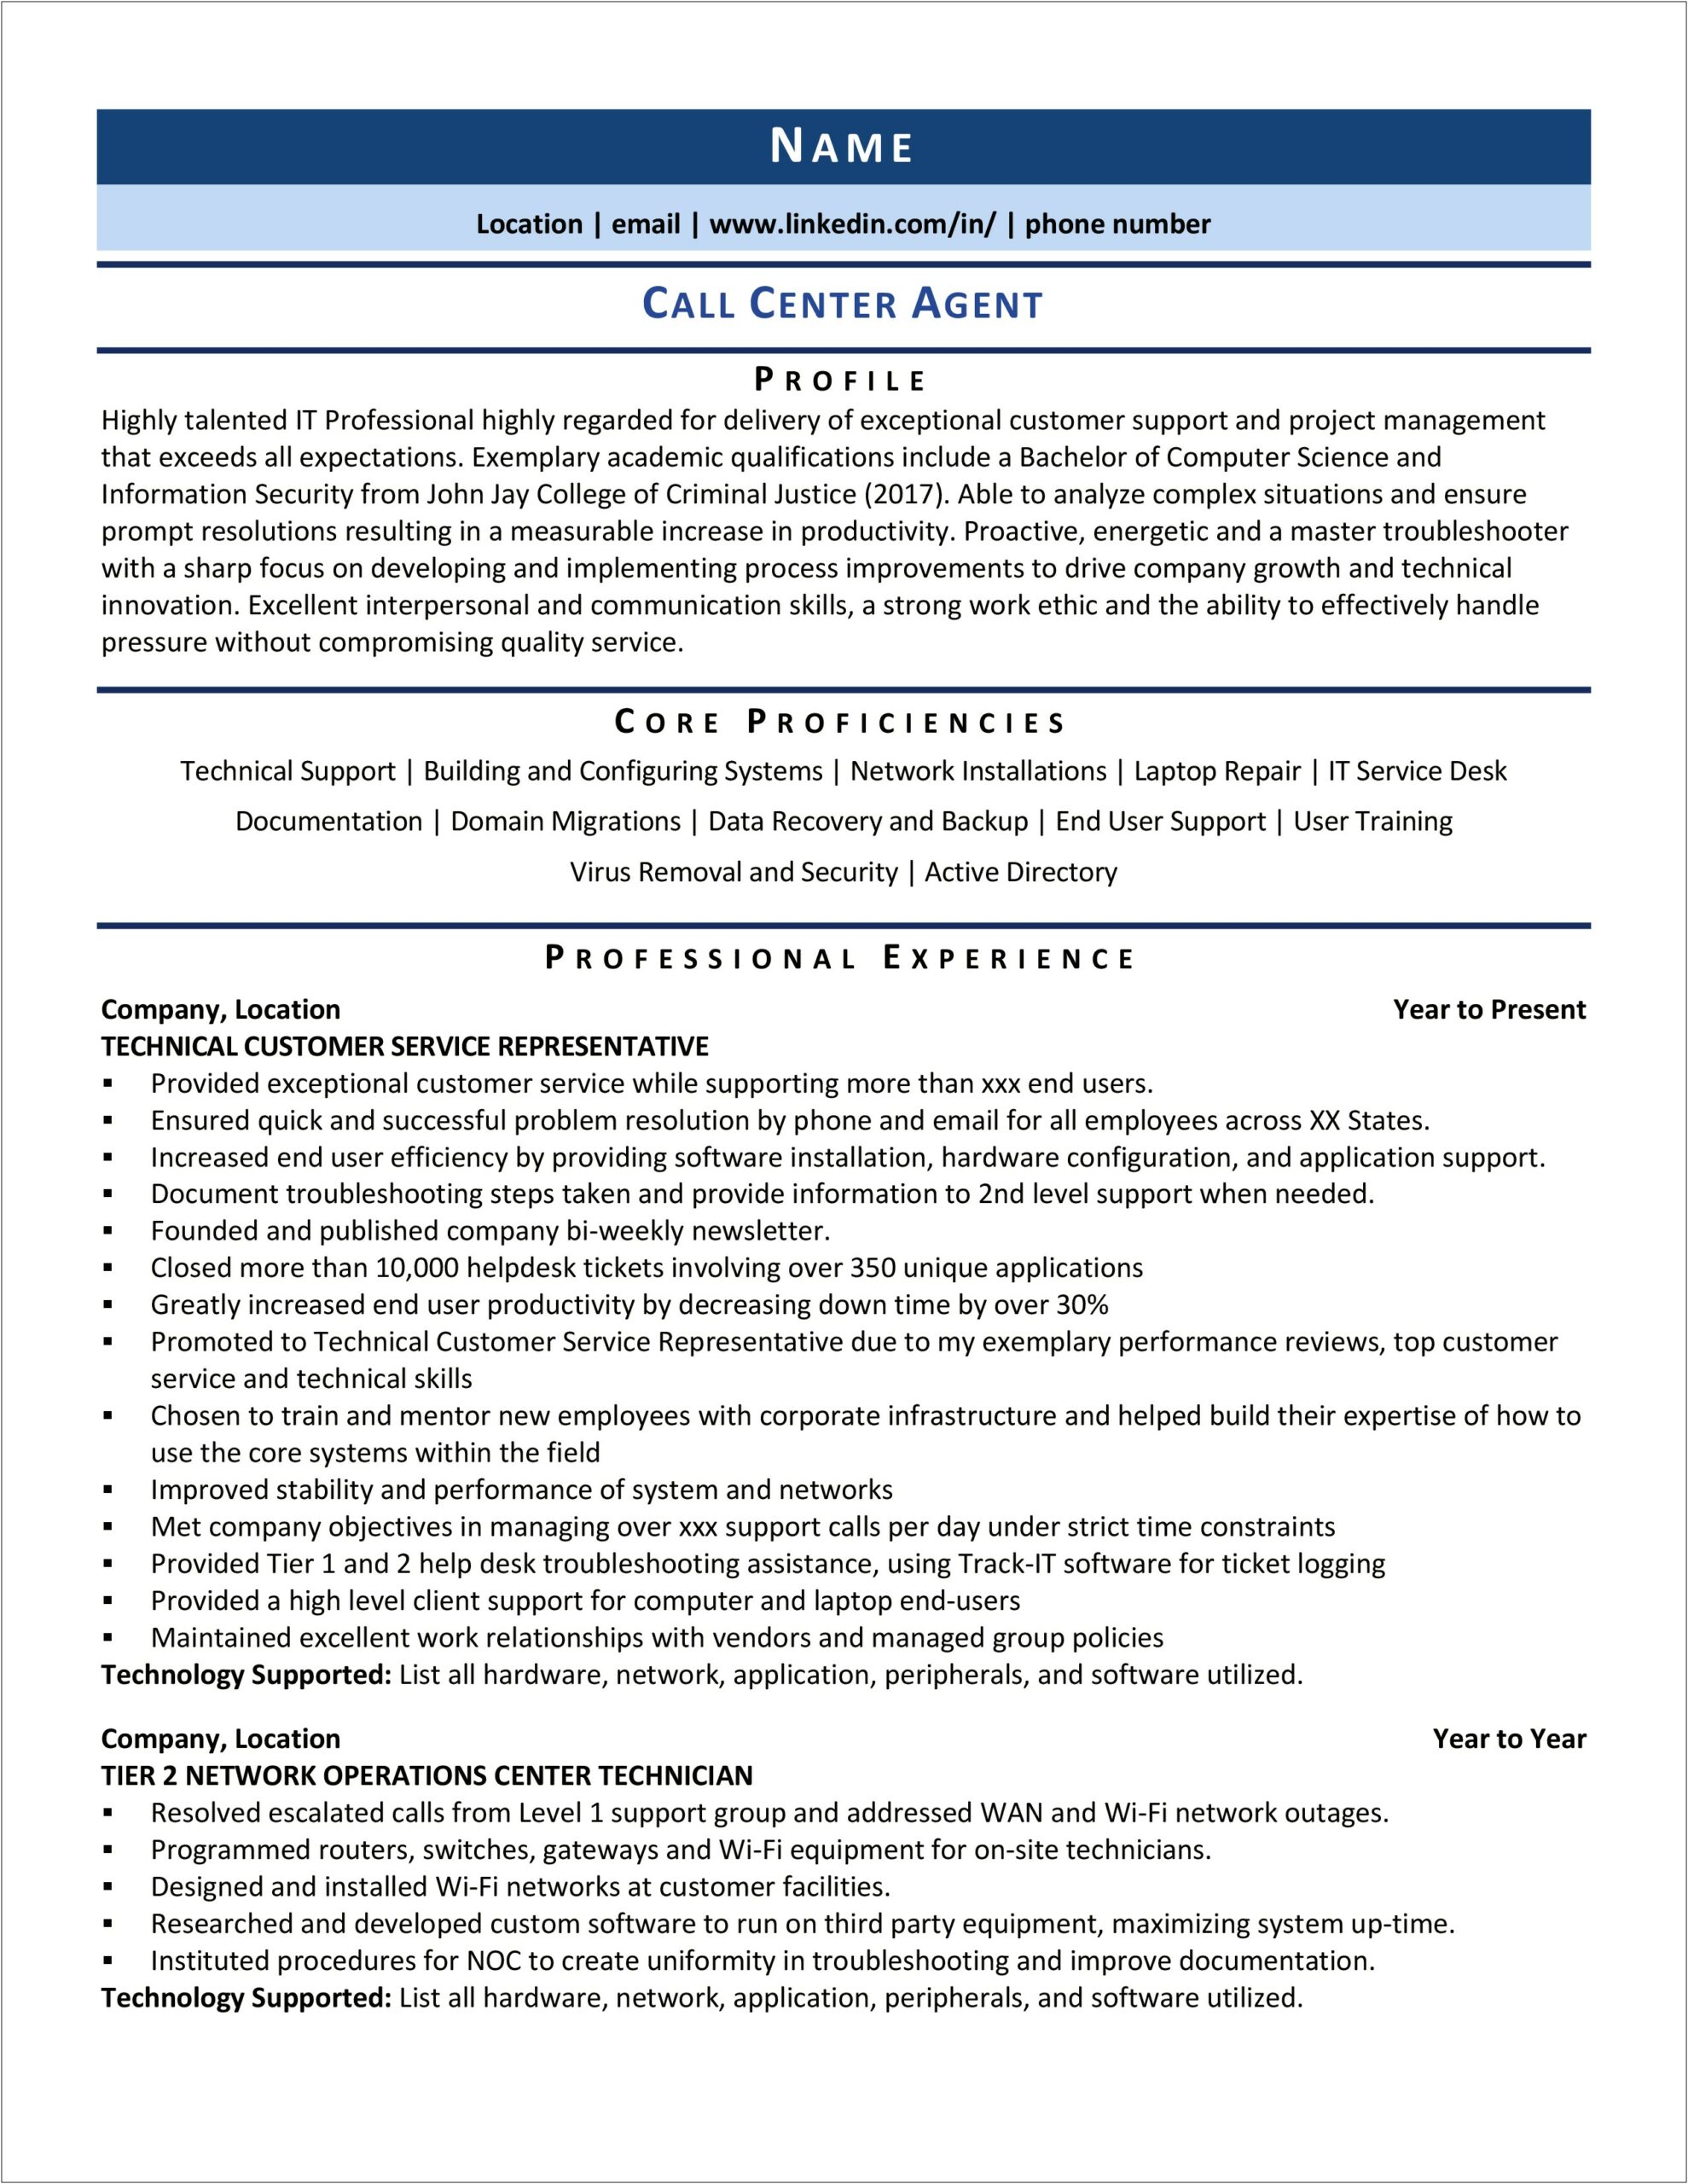 Sample Resume For Position With Treatment Center